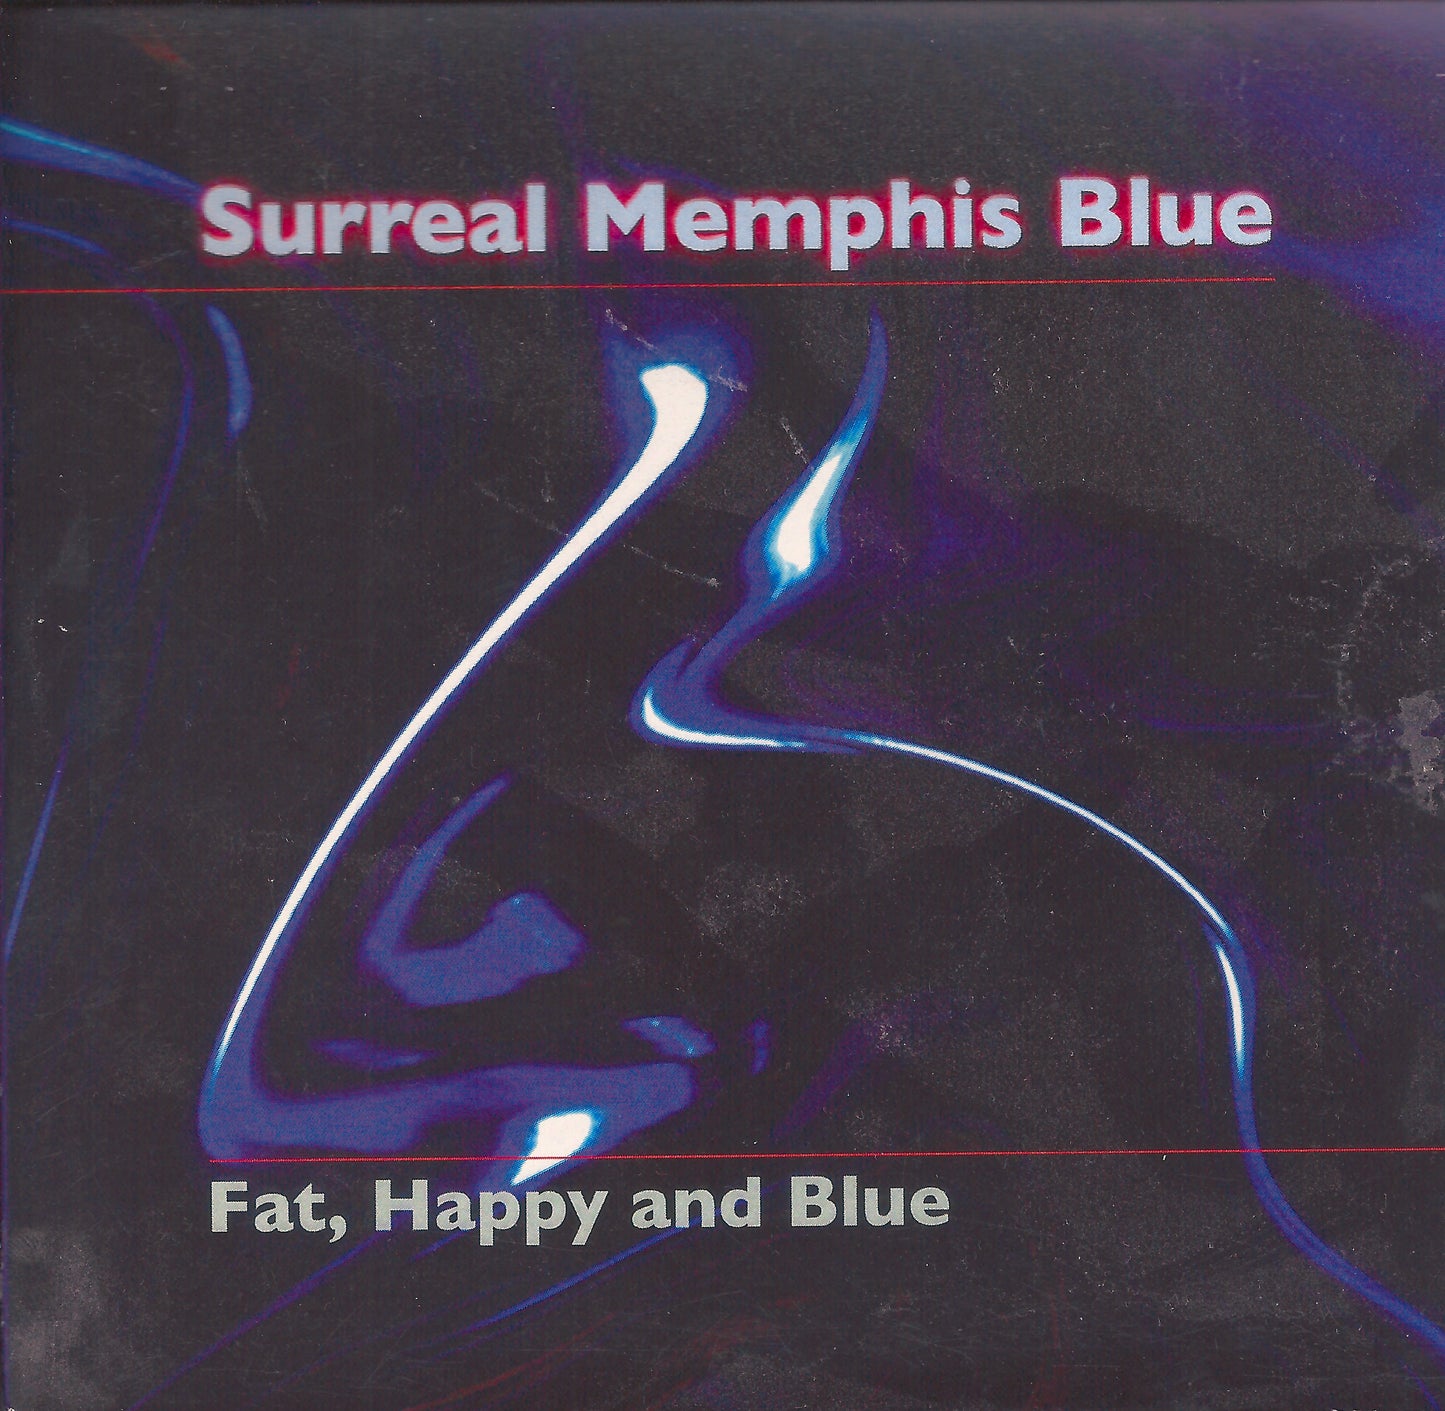 Surreal Memphis Blue - Fat, Happy and Blue